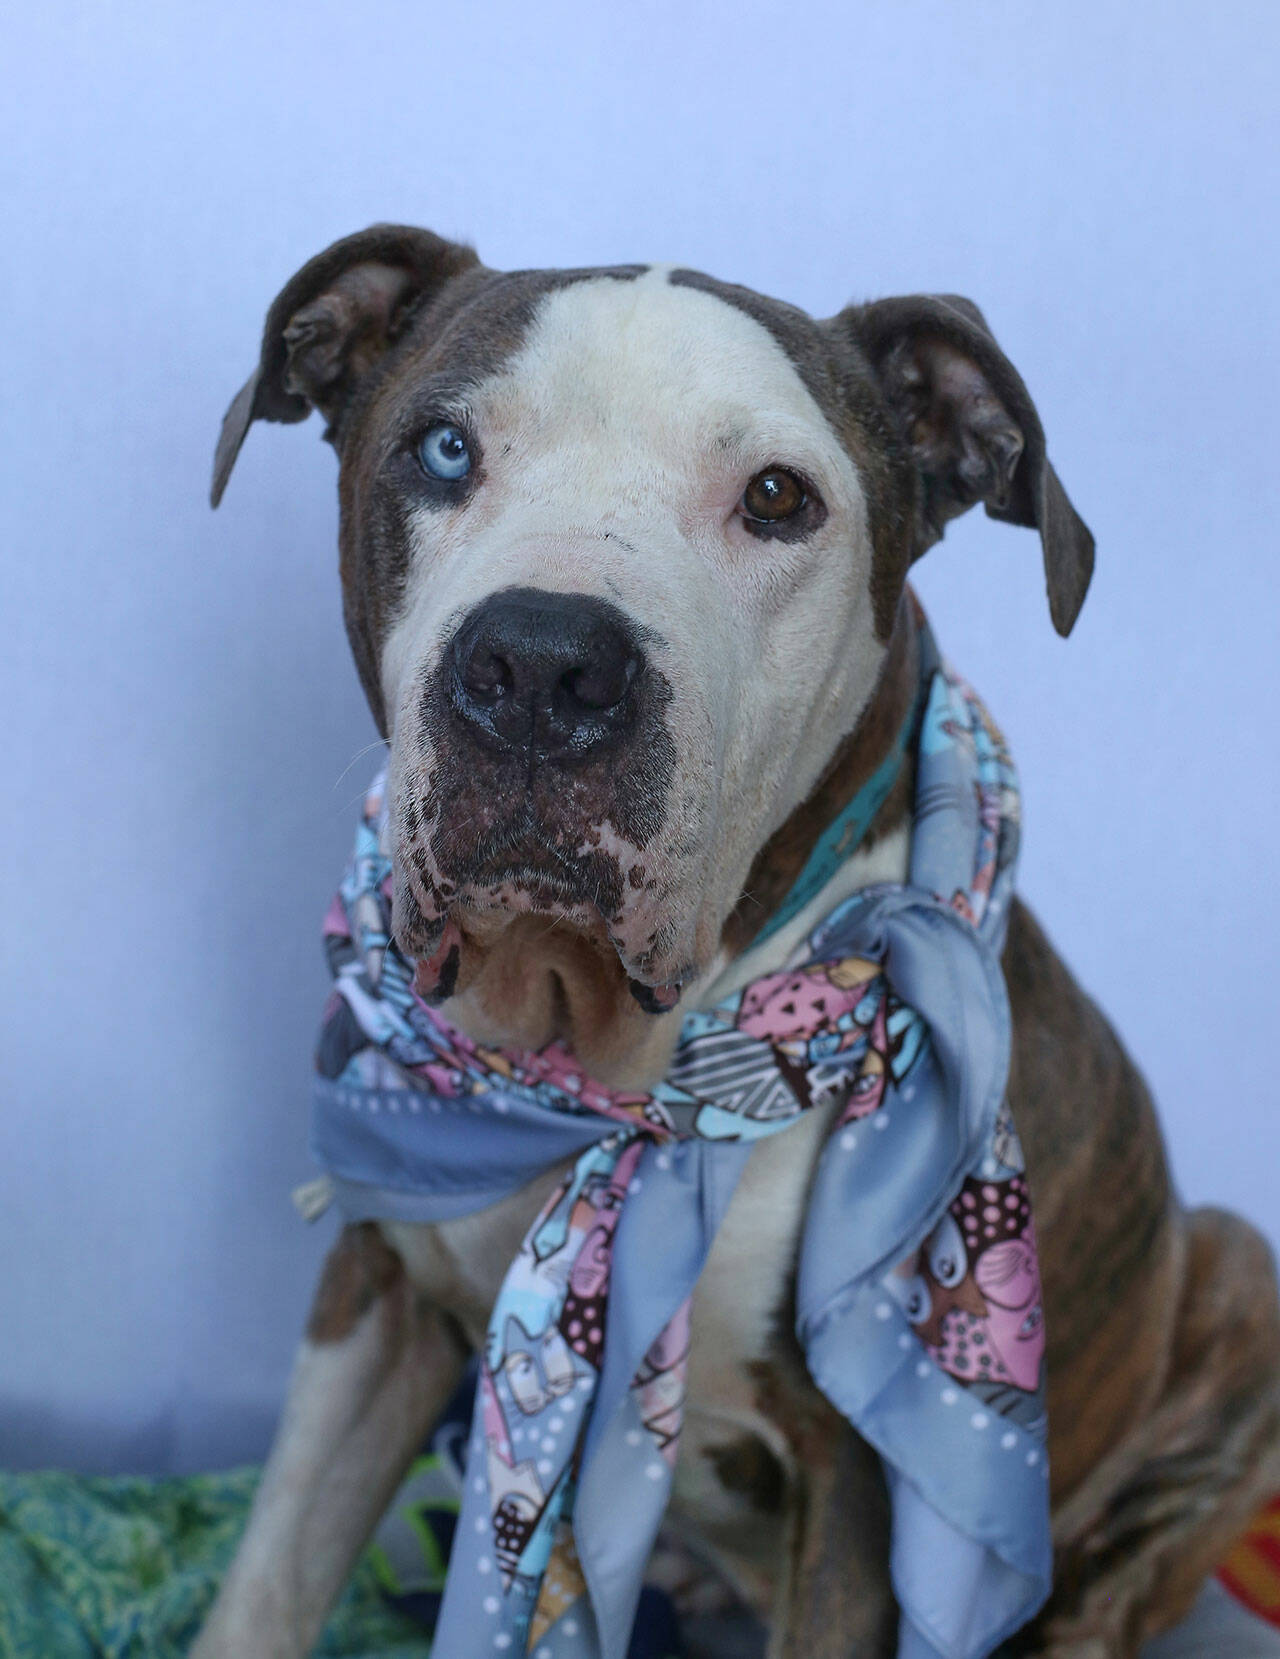 Petey the pit bull is a sweet boy who just wants to be with people — despite the fact that people in the past have clearly not been good to him. (Phil Clapham Photo)